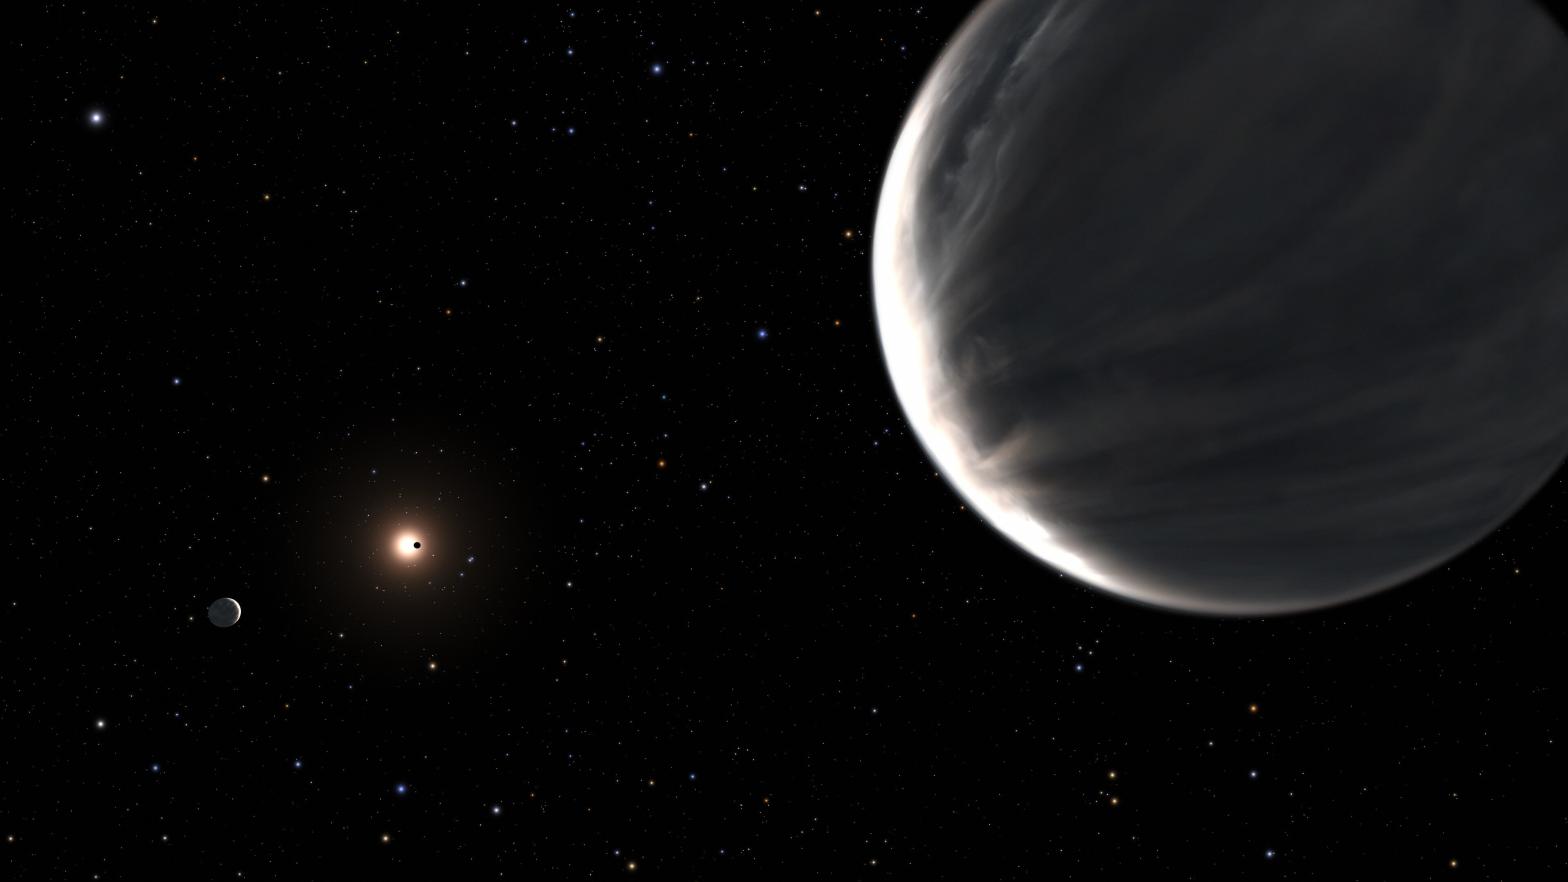 An artist's rendition of the Kepler-138 system, with the Earth-like water world Kepler-138d in the foreground. (Illustration: NASA, ESA, L. Hustak (STScI))